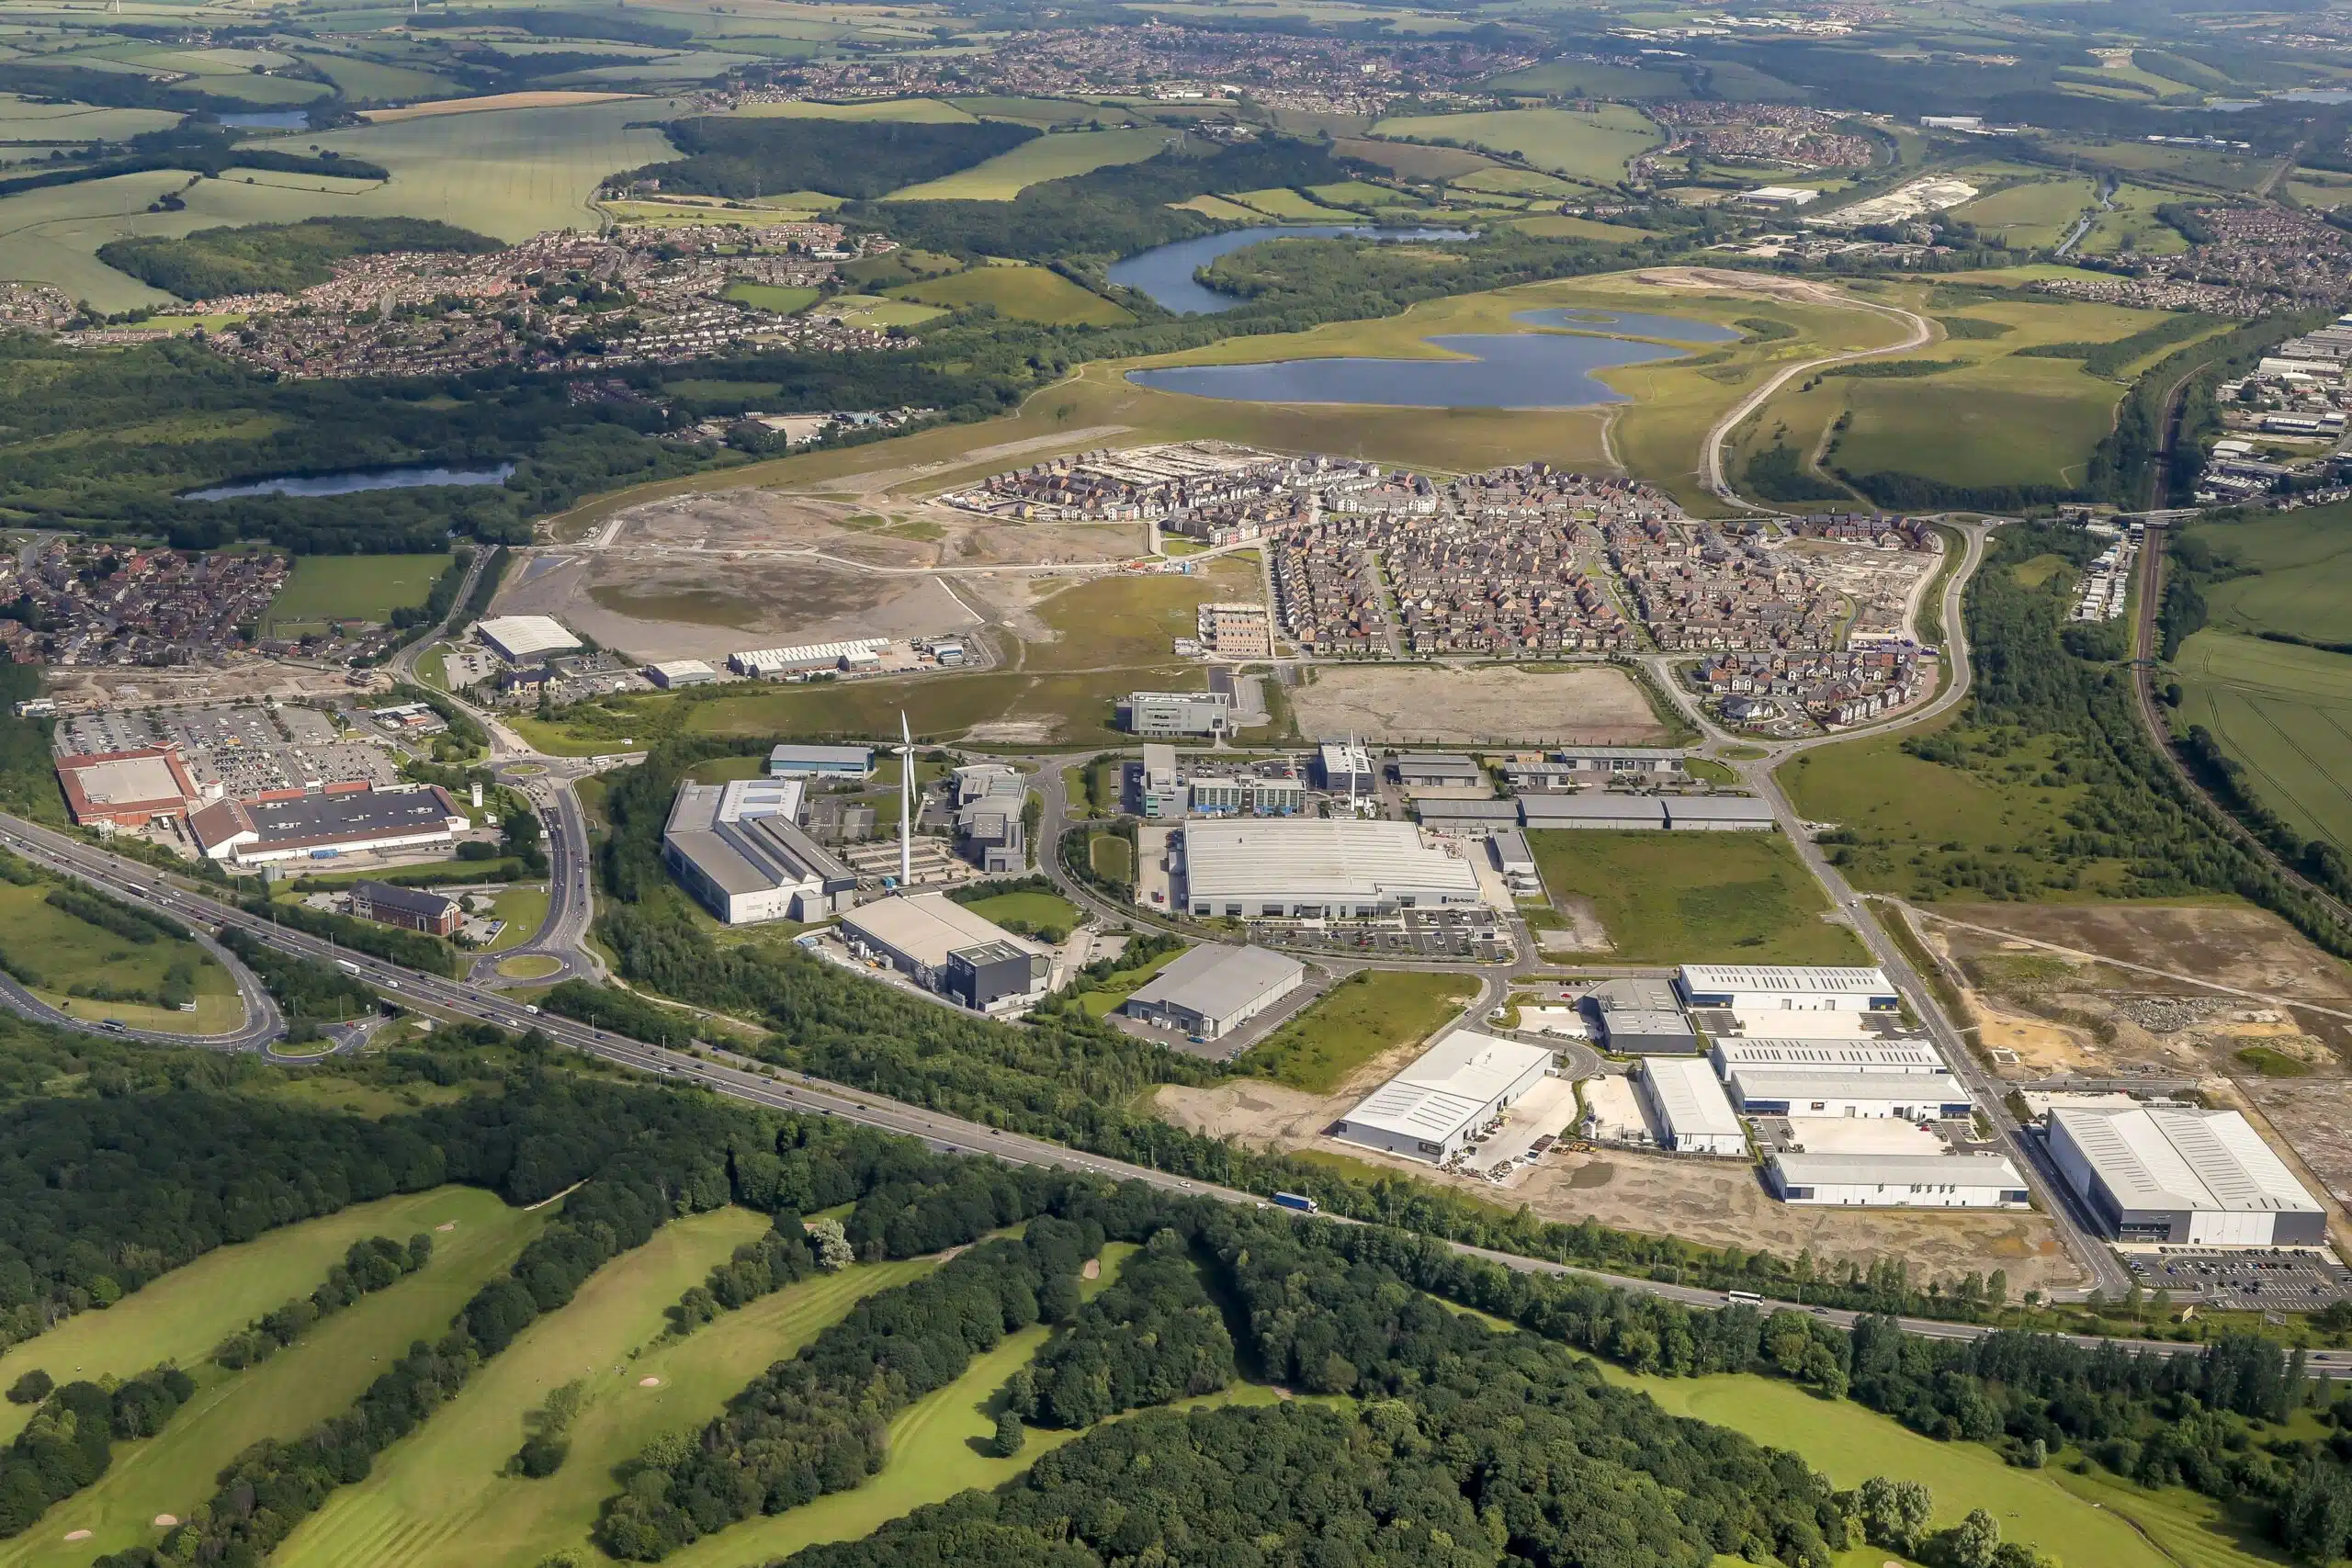 Harworth Group disposes of three engineered land parcels in England